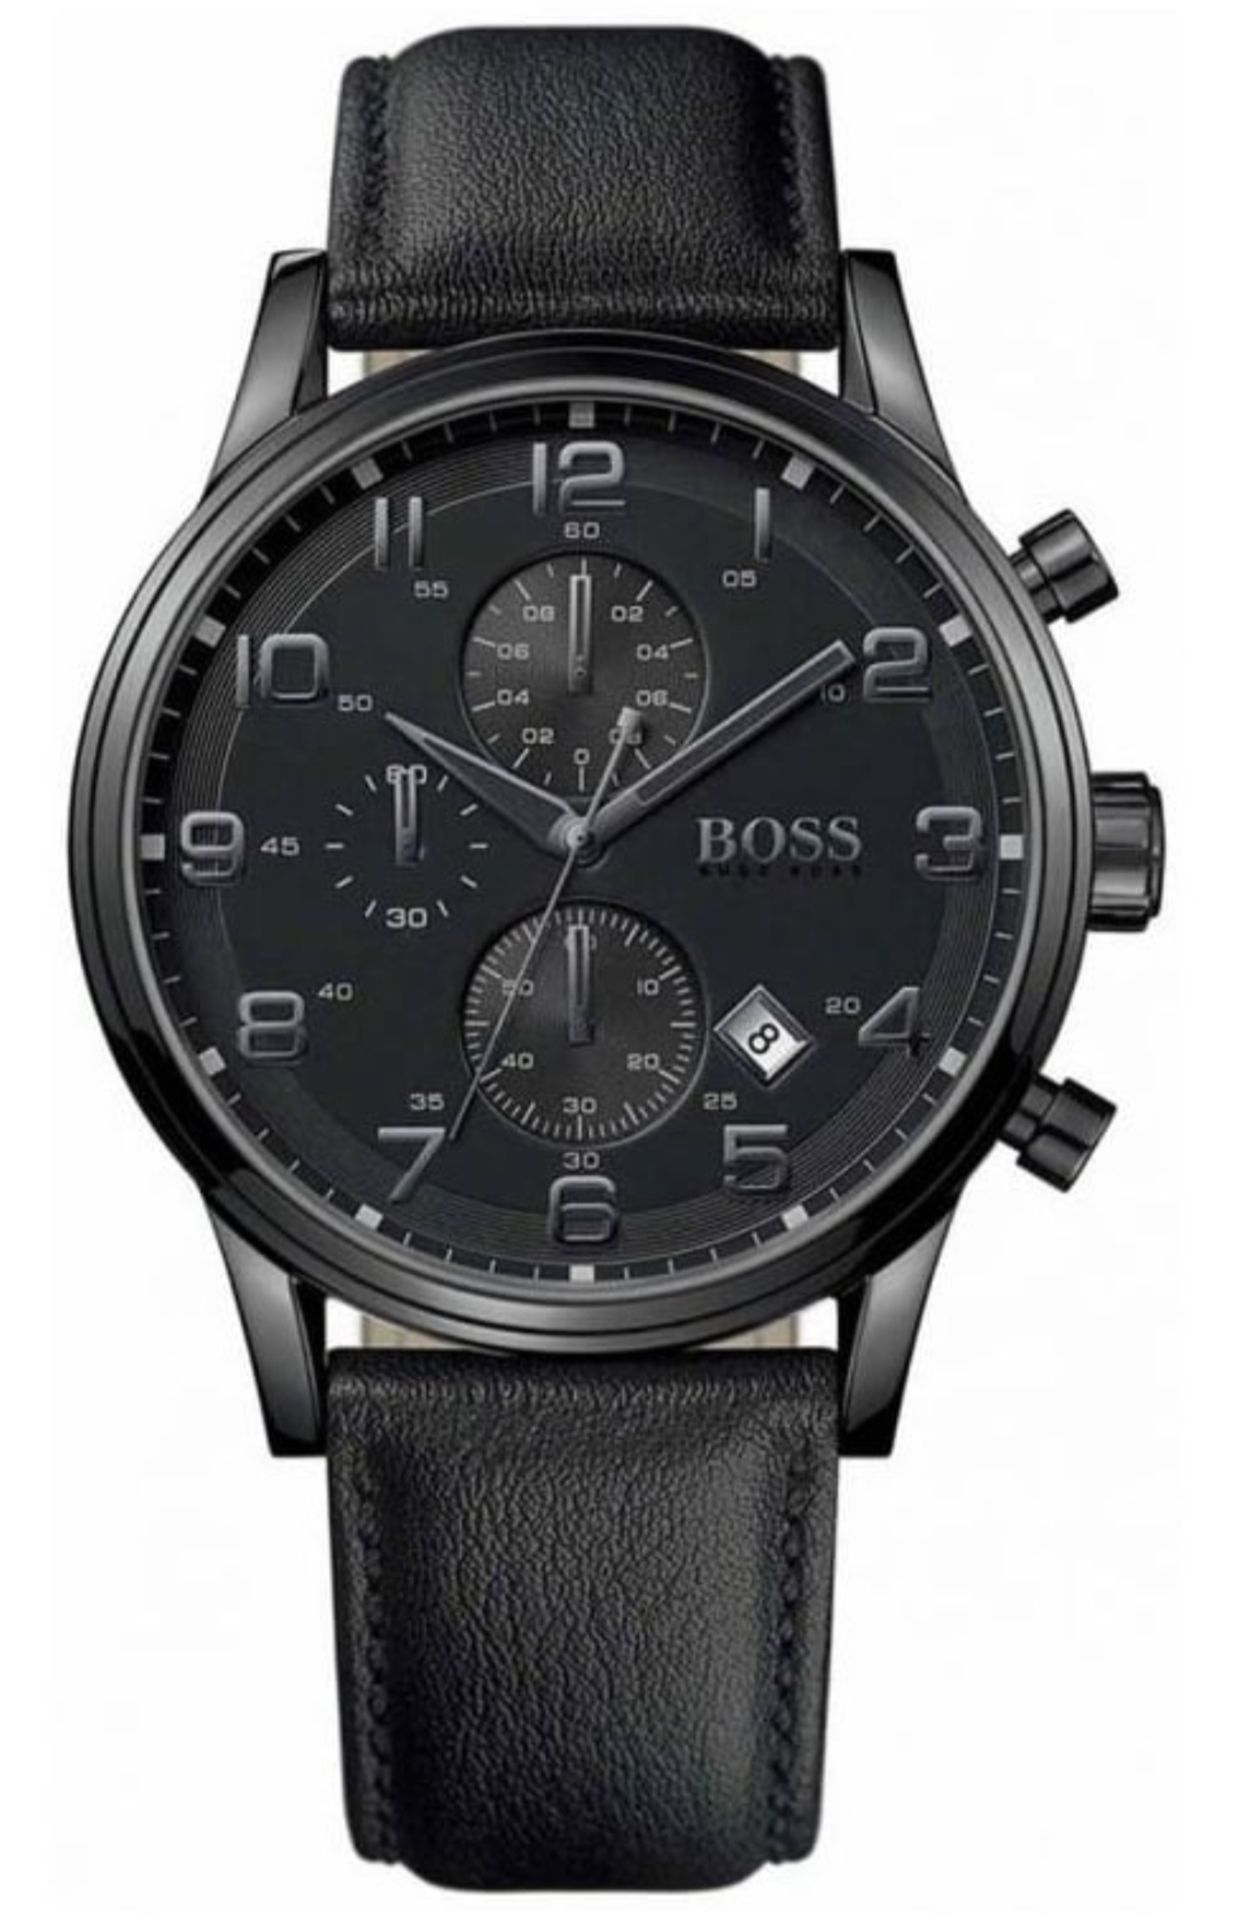 Hugo Boss Trade Lot 1C. A Total Of 20 Brand New Hugo Boss Watches - Image 5 of 20